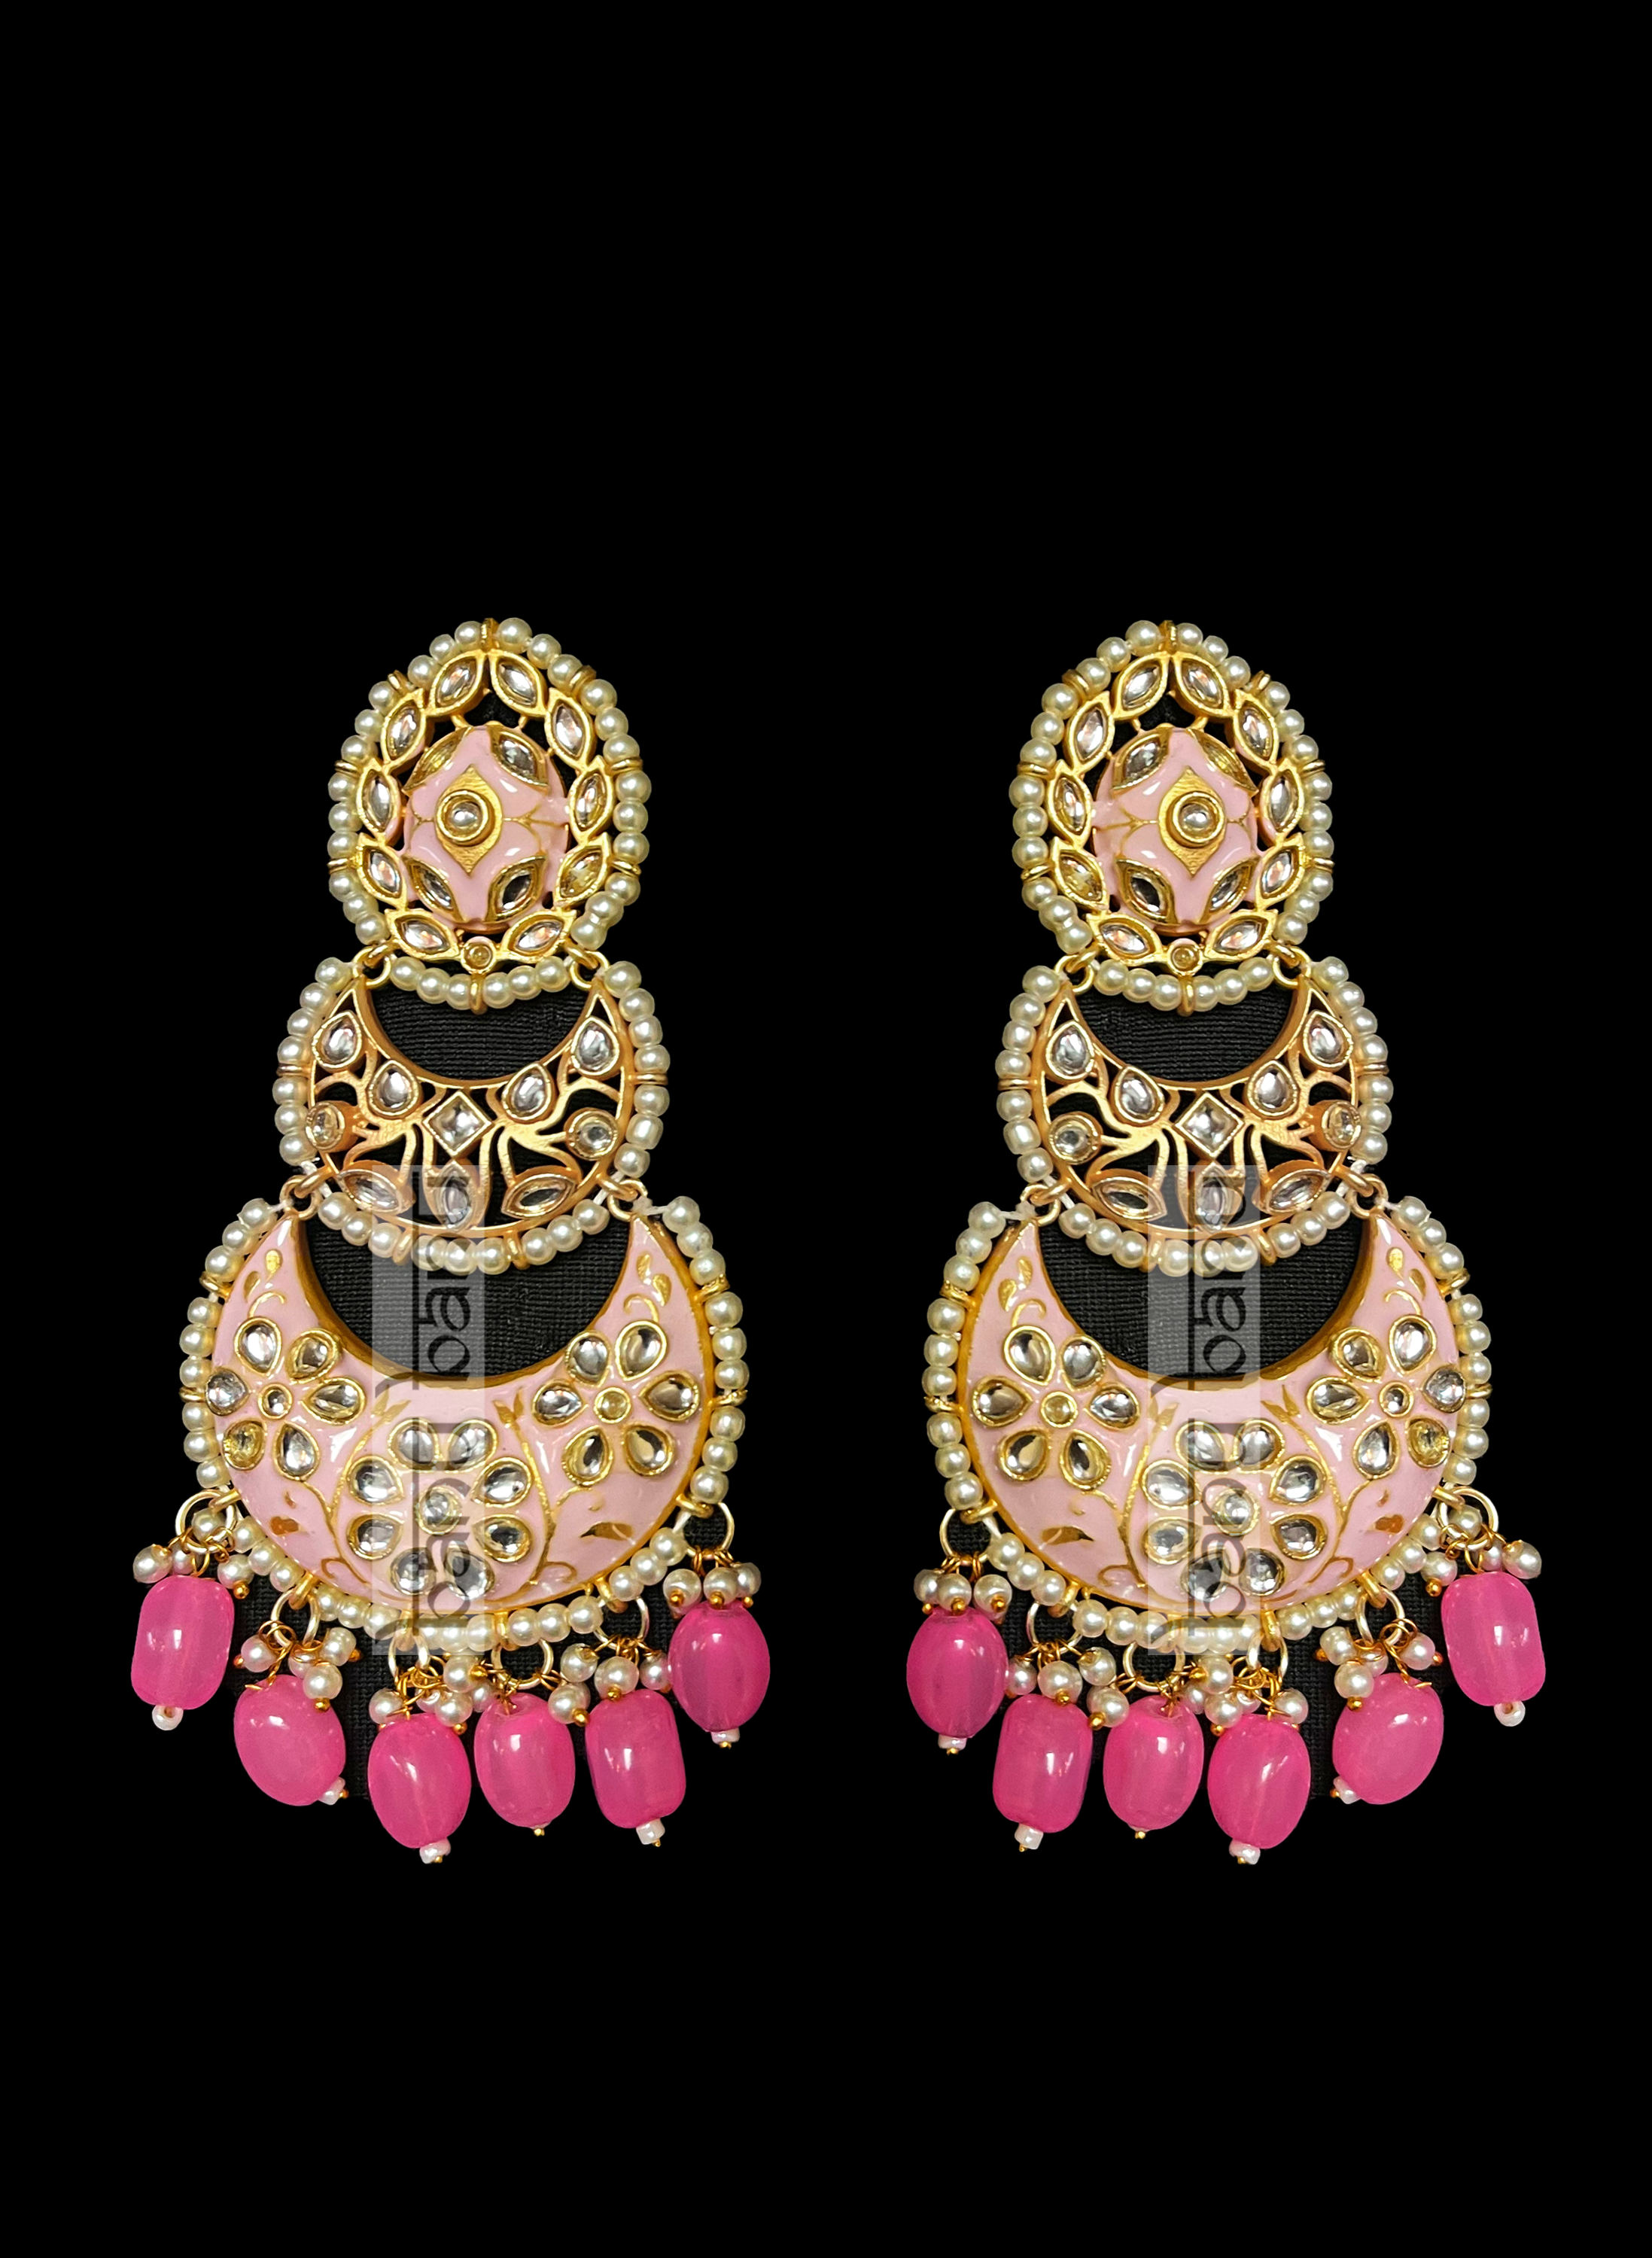 Pastel pink Indian Earrings with Kundan & Pearls for Brides